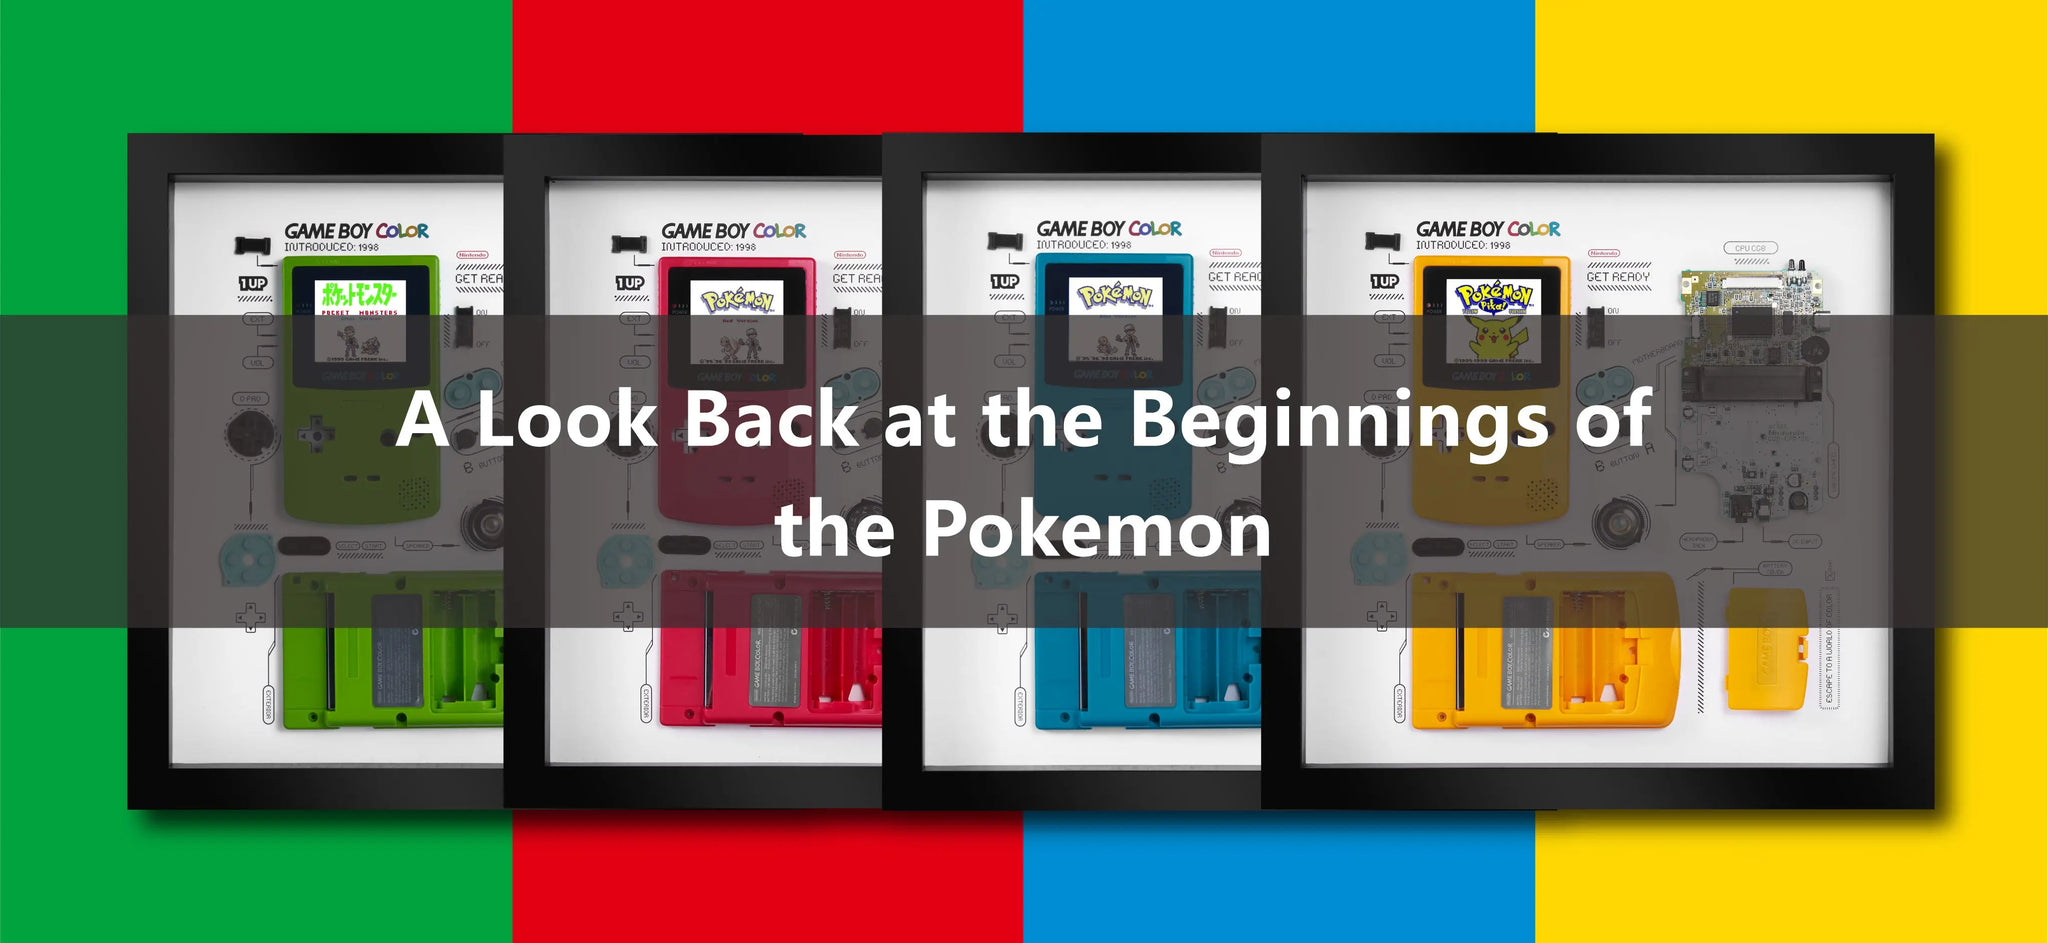 A Look Back at the Beginnings of the Pokemon